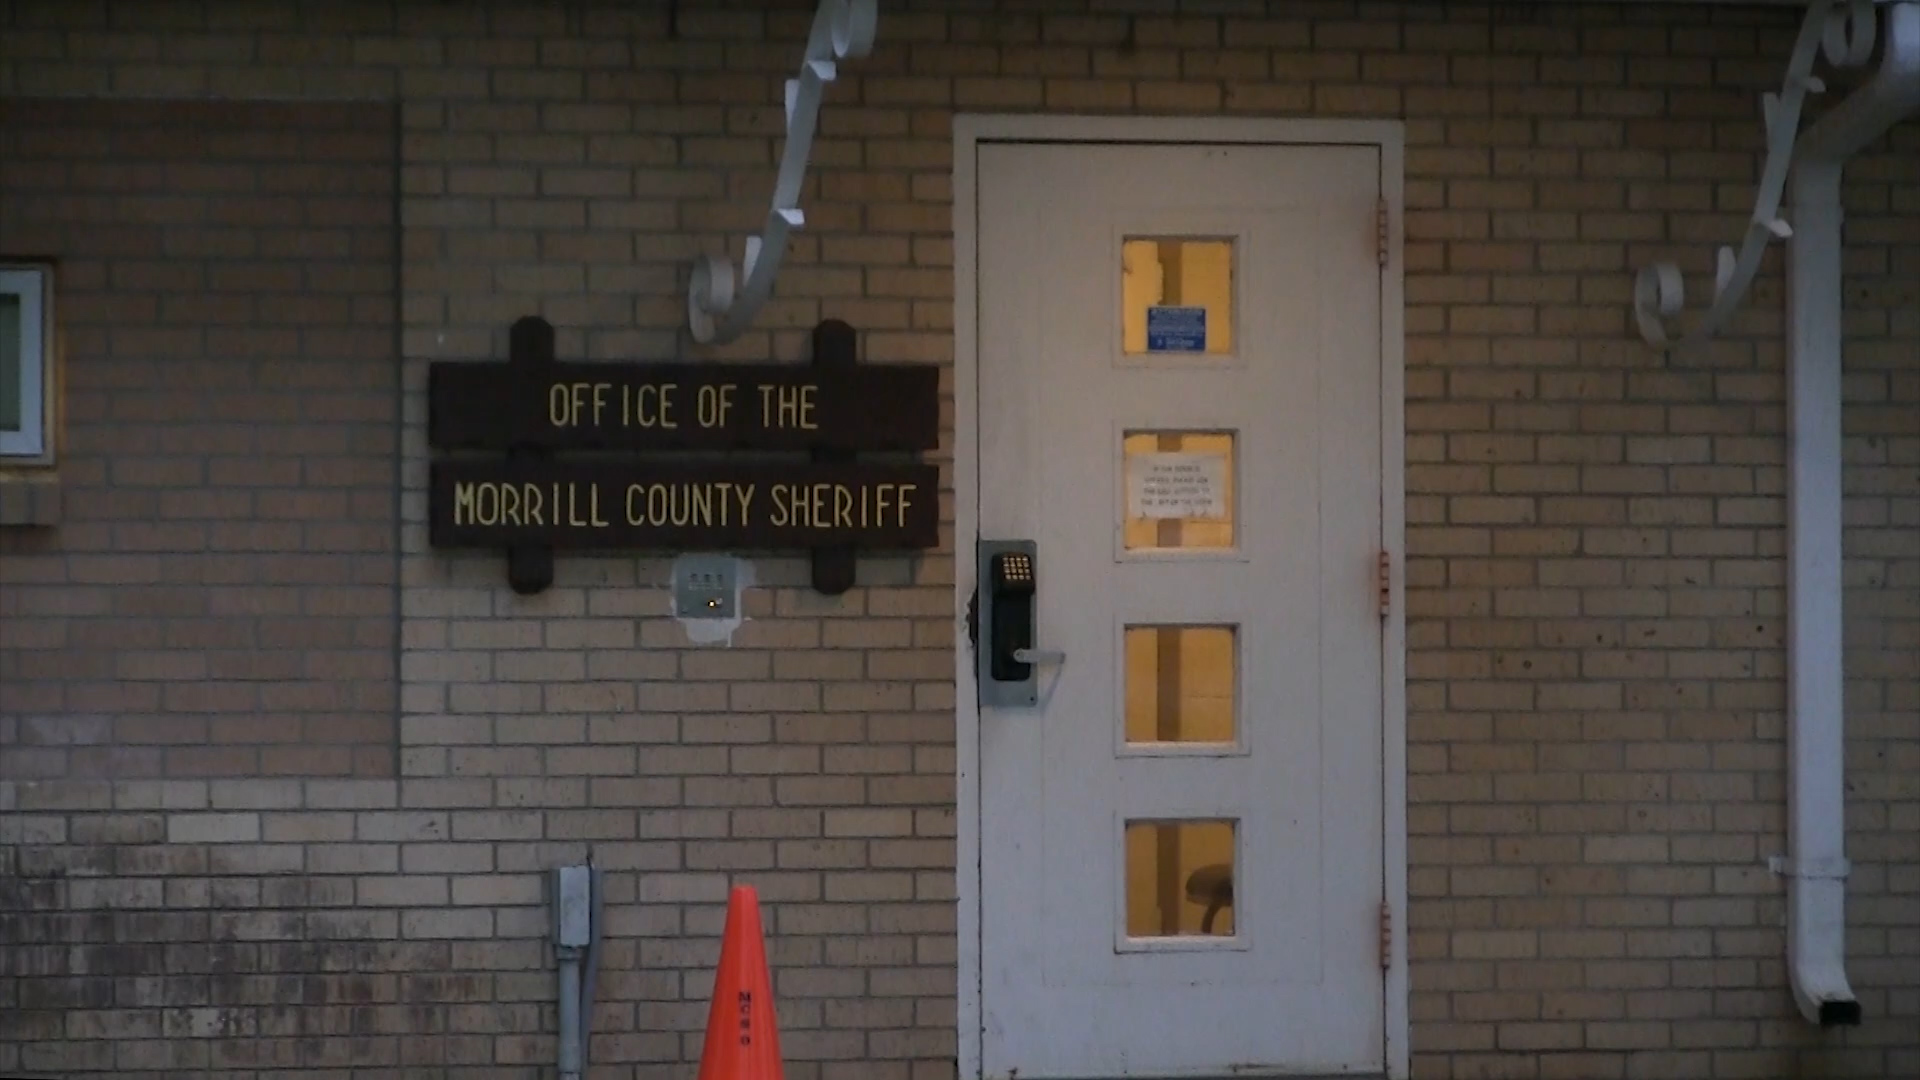 Image of Morrill County Sheriff's Office